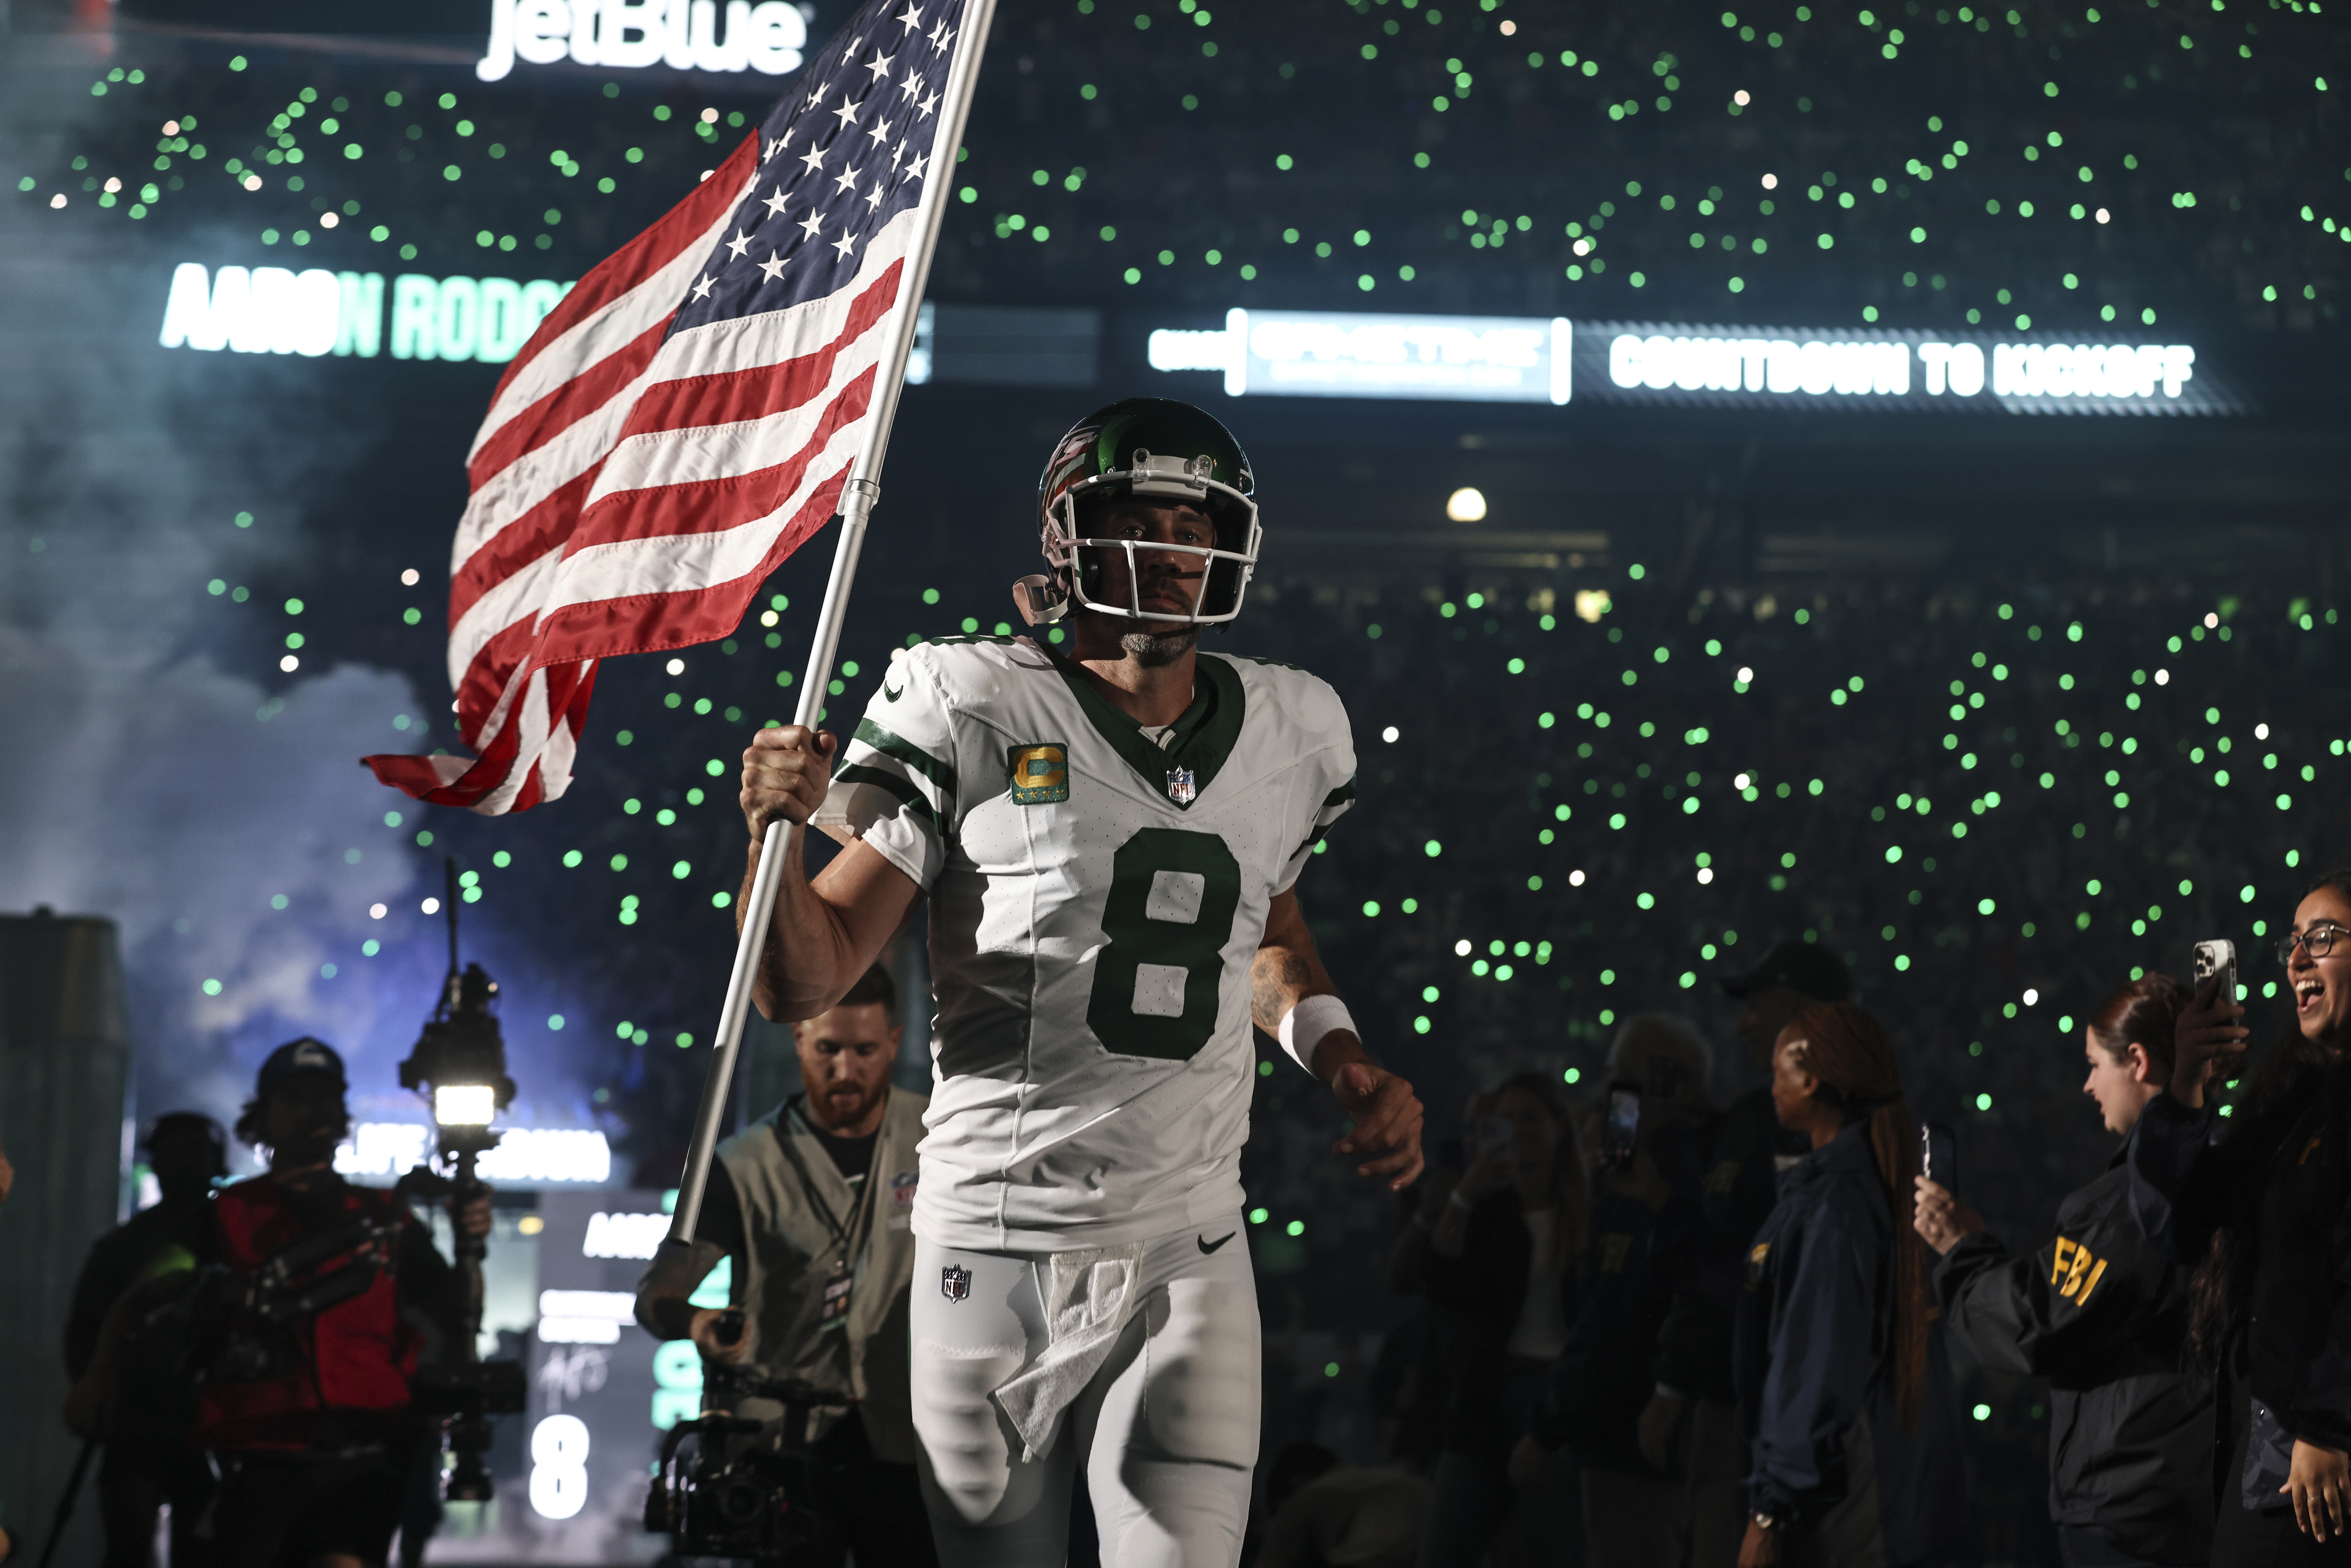 Aaron Rodgers #8 of the New York Jets takes the field holding an American flag